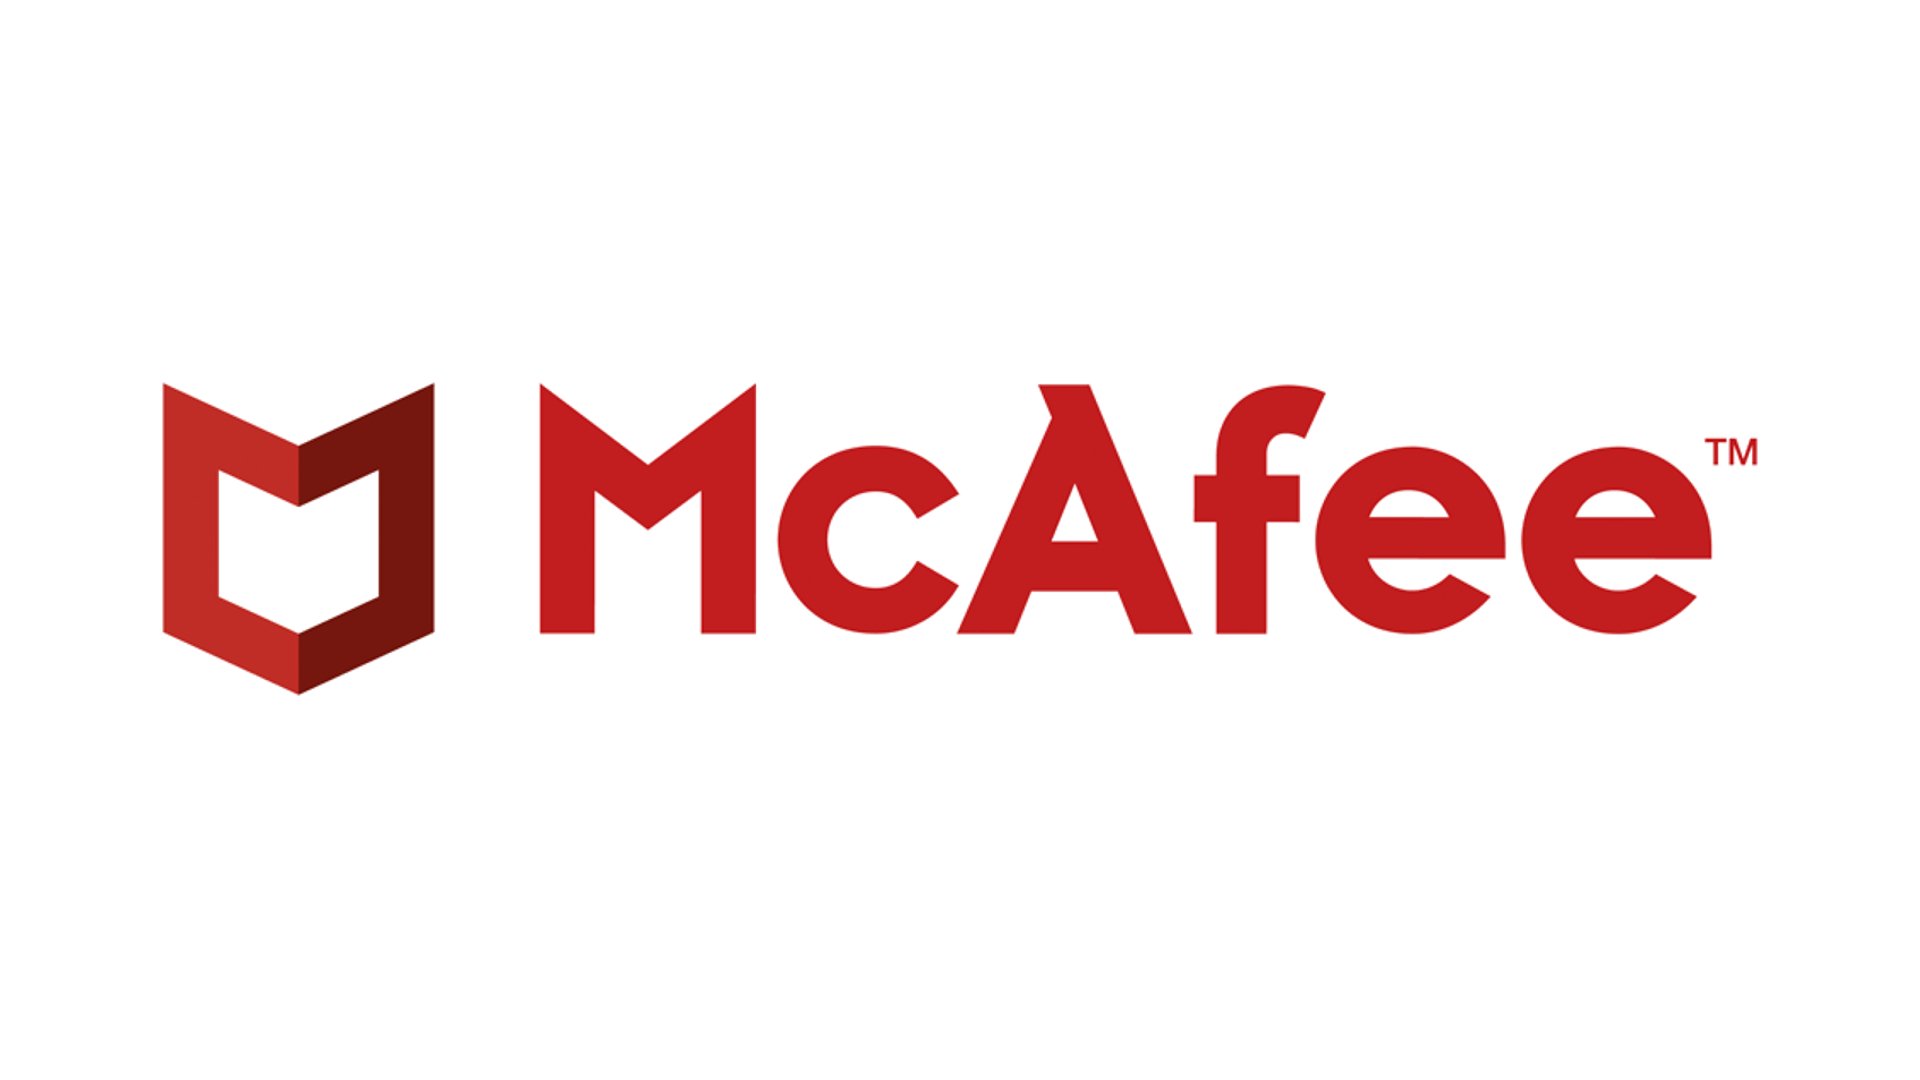 Buy McAfee Antivirus so you can fully protect